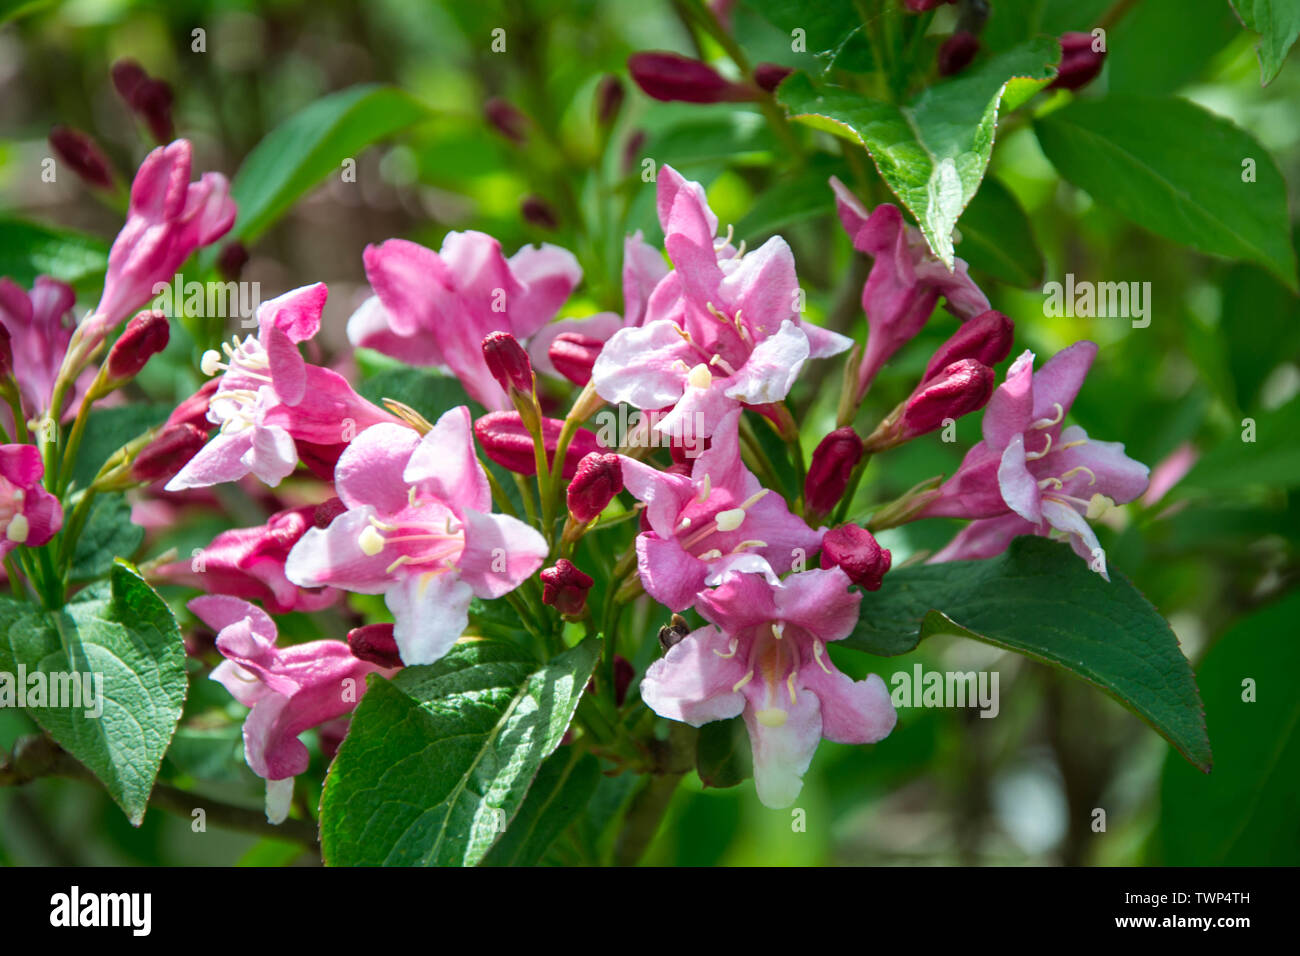 Close-up of Weigela Rosea funnel shaped pink flower, fully open and closed small flowers with green leaves. Selective focus of bright pink petals Stock Photo